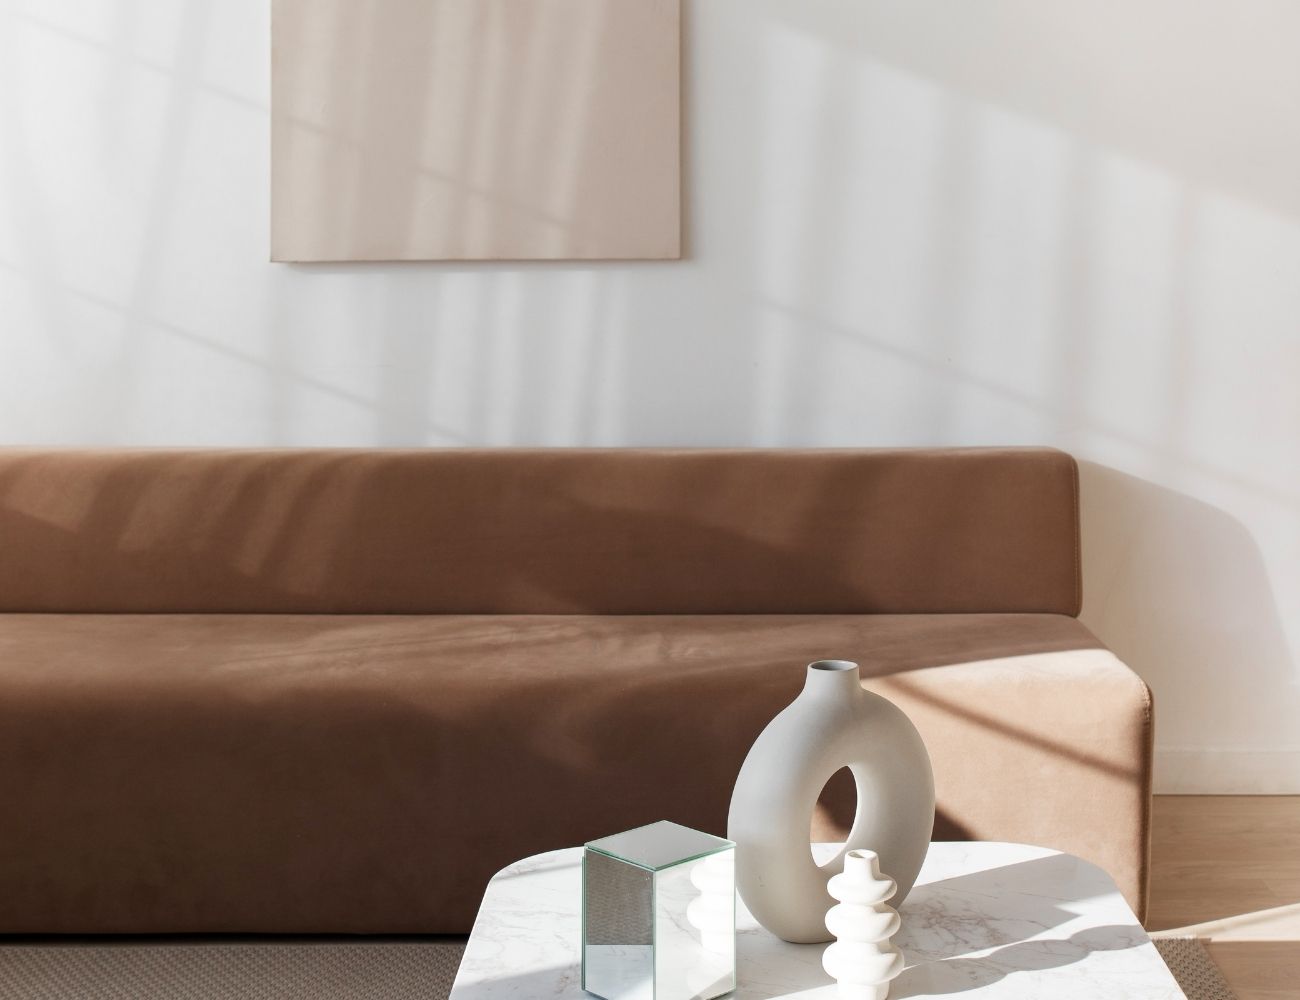 A sleek brown sofa is in the background against a white wall. Two white geometric vases and a glass prism are sitting atop a white marble coffee table in the foreground.